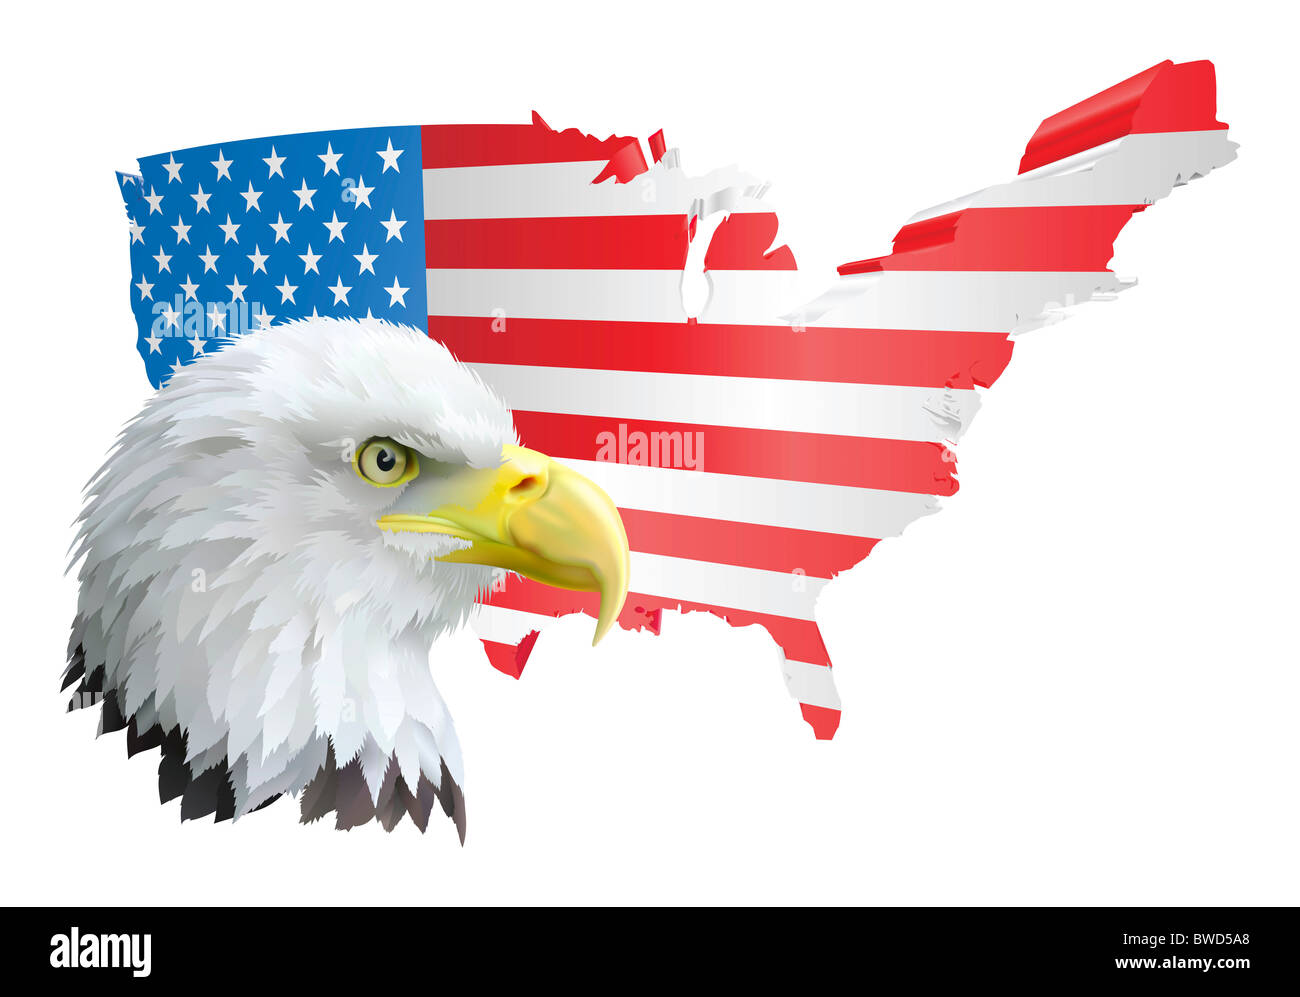 illustration of the map of the united states of america and the eagle Stock Photo